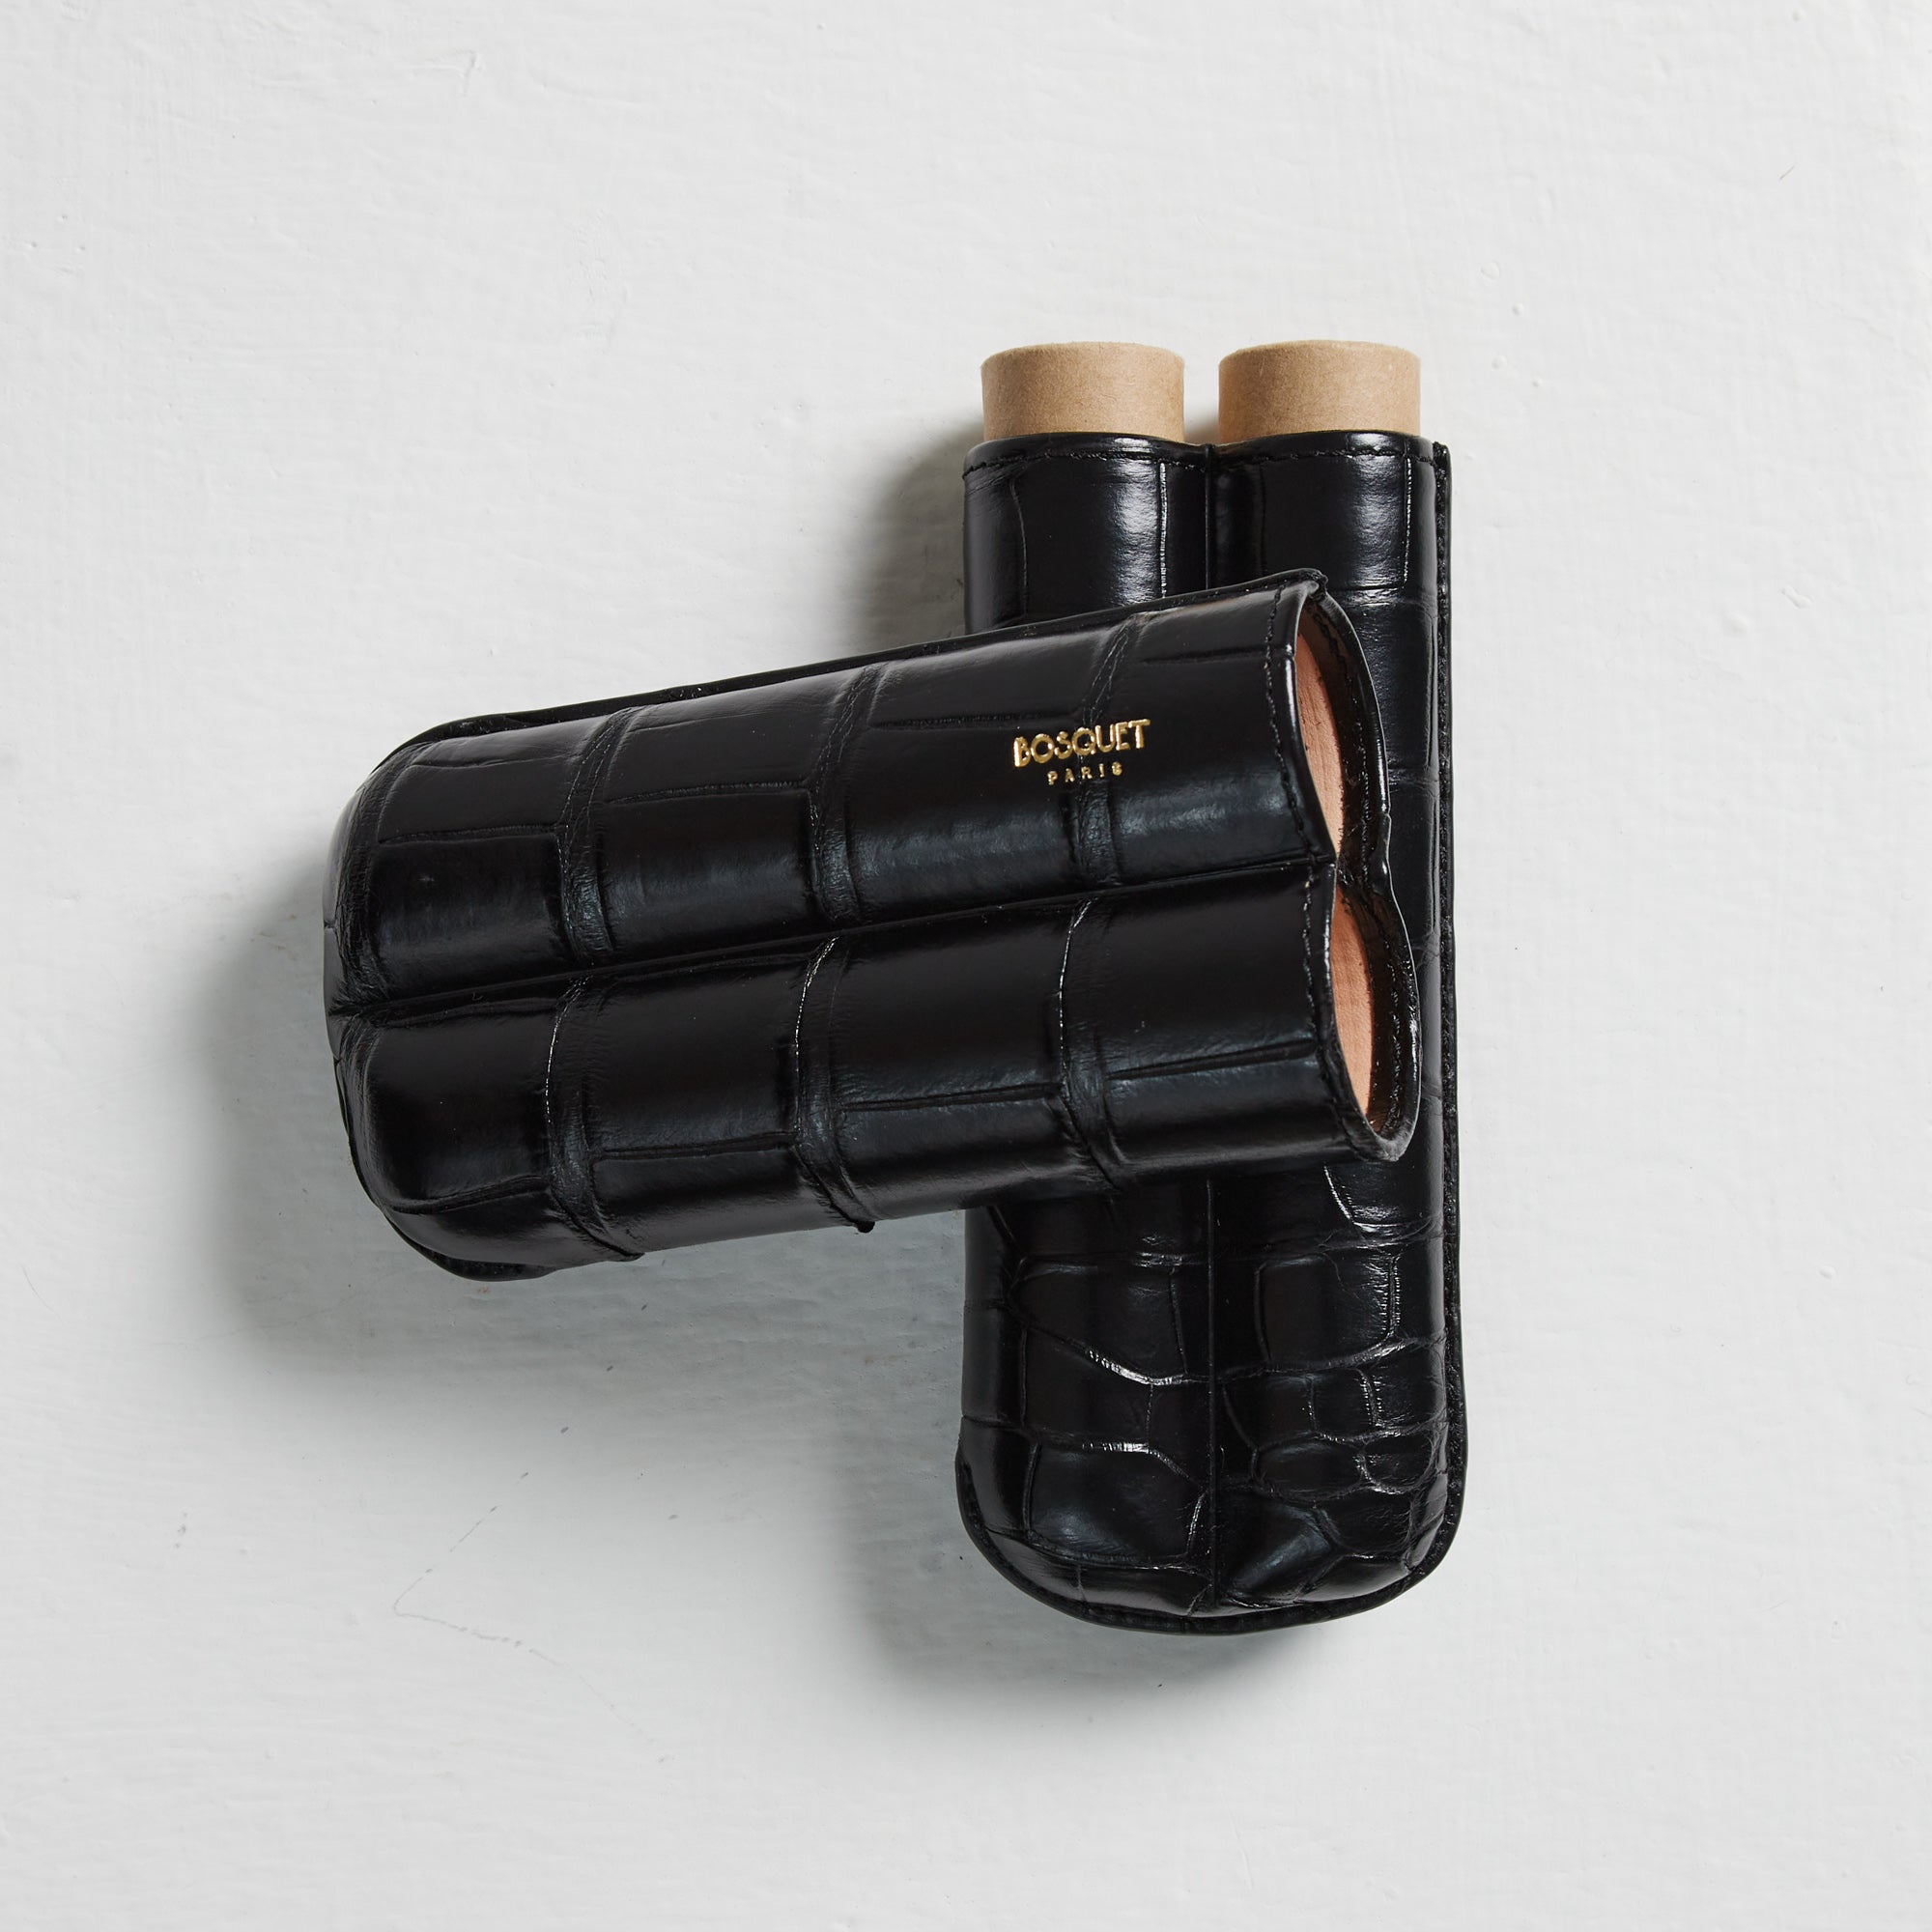 A black case with two tubes made of crocodile leather, designed for transportation of items such as Bosque Crocodile Cigar Cases.